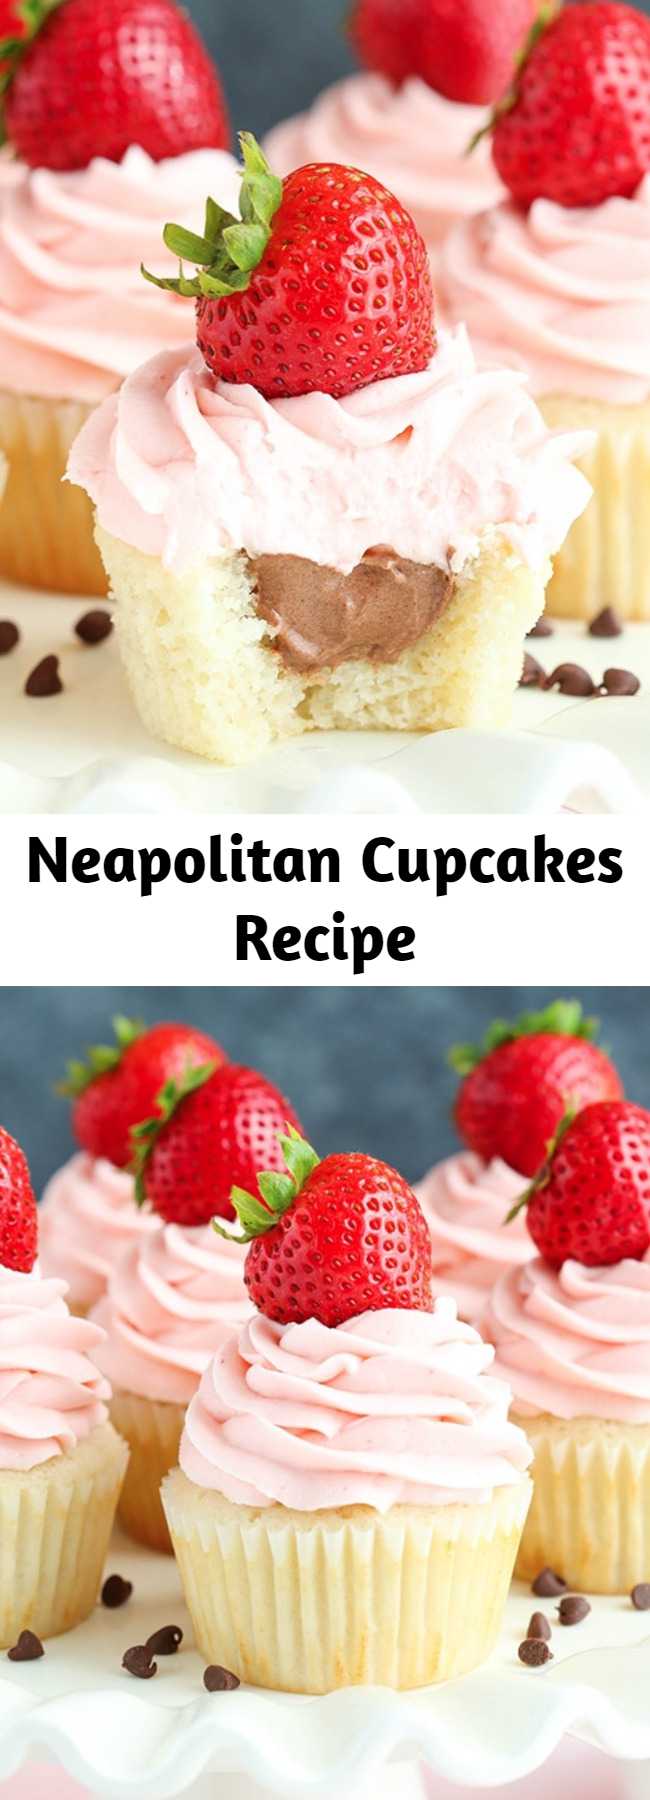 Neapolitan Cupcakes Recipe - Neapolitan Cupcakes made with a vanilla cupcake, chocolate mousse filling and strawberry frosting! The flavors are so perfectly balanced – I love them!